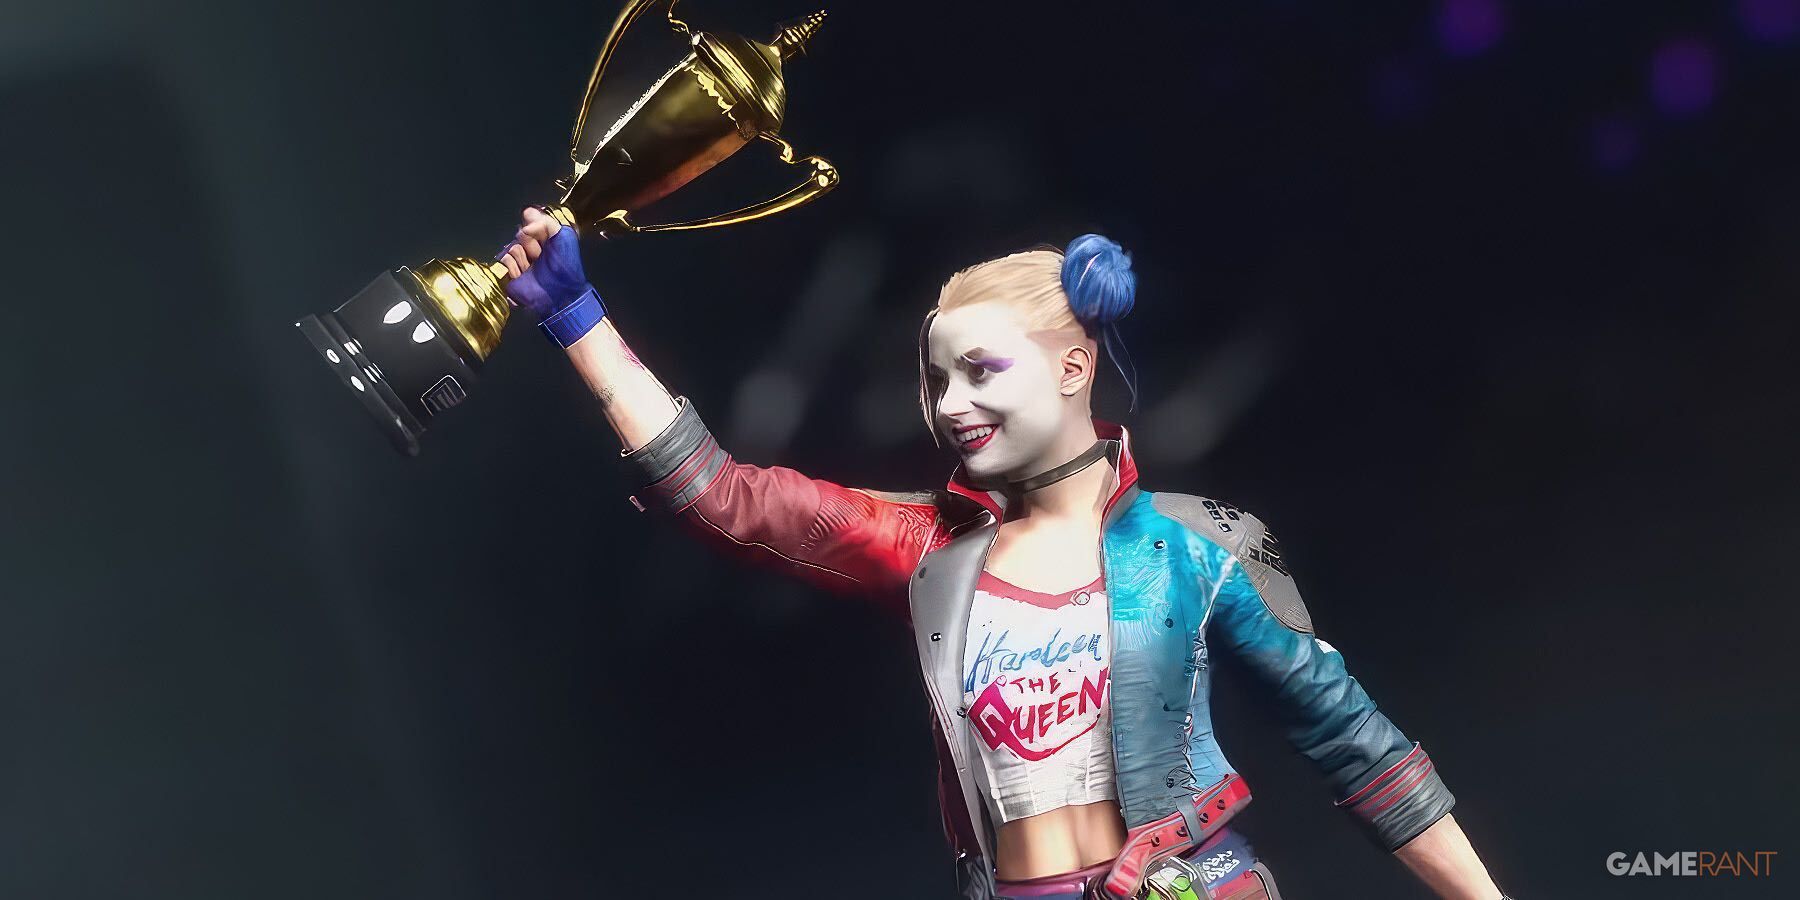 harley quinn proudly holding a gold trophy